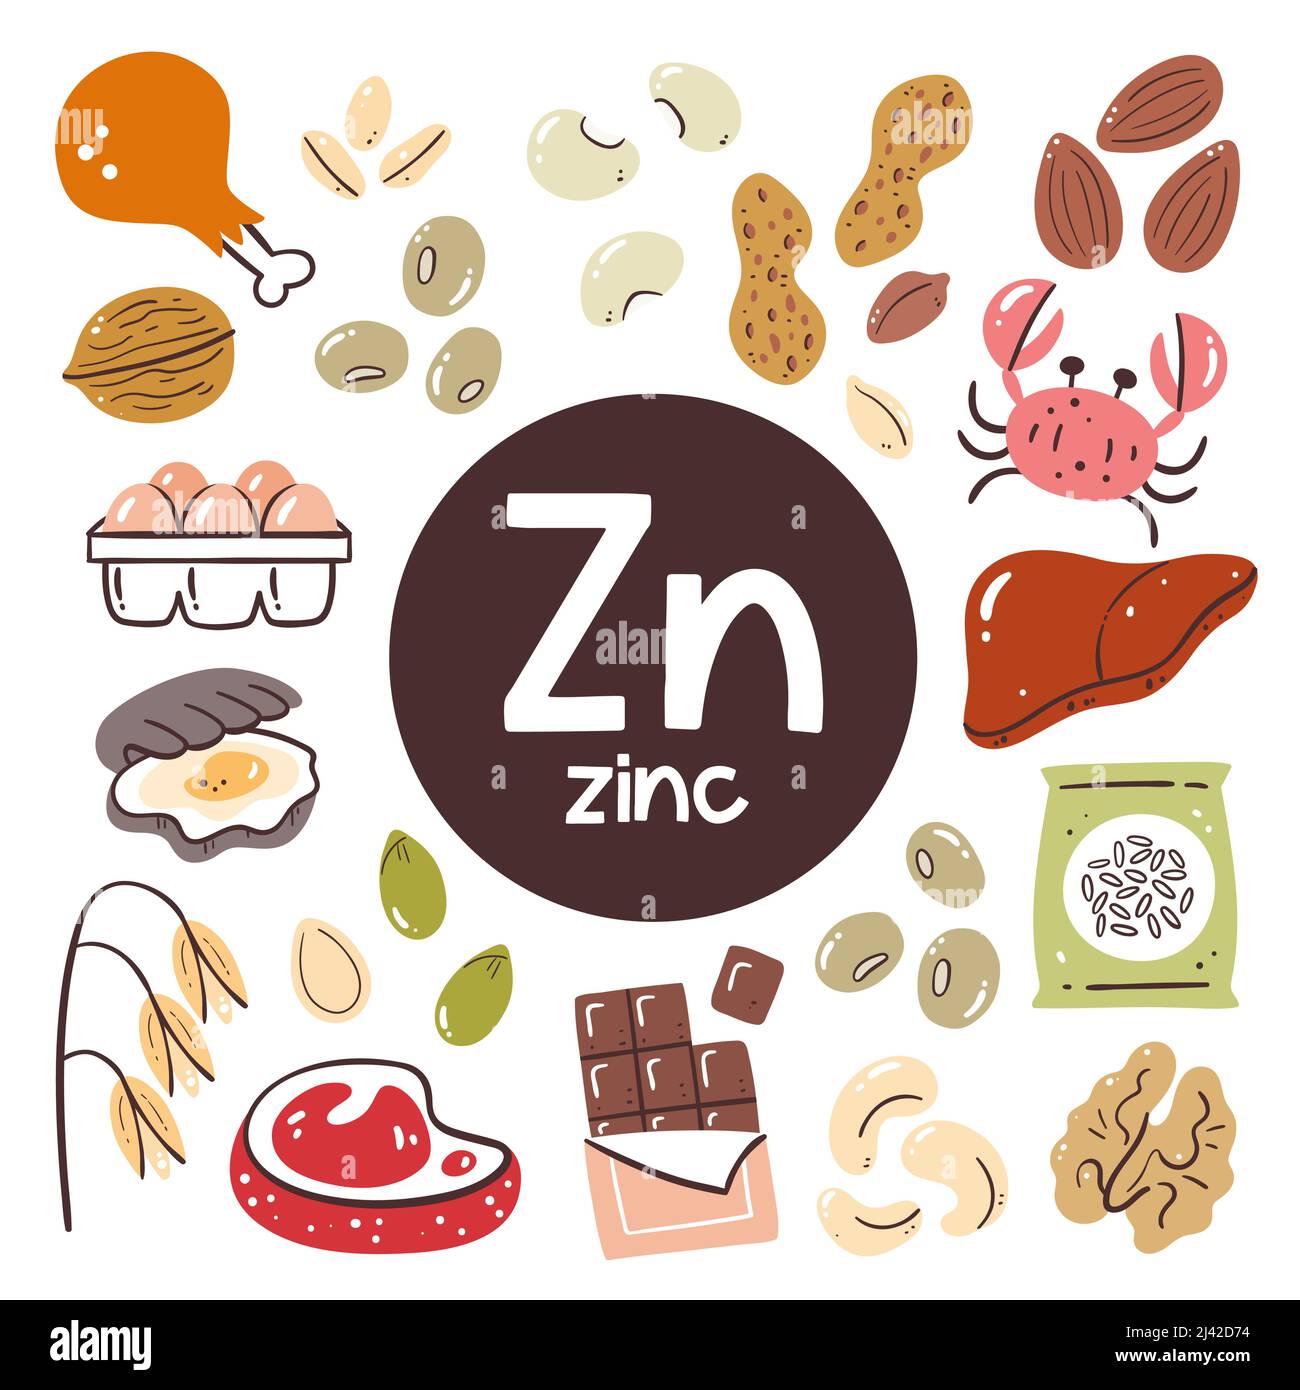 Food products with high level of Zinc. Cooking ingredients. Meat, chocolate, legumes, grain, nuts, seafood. Stock Vector